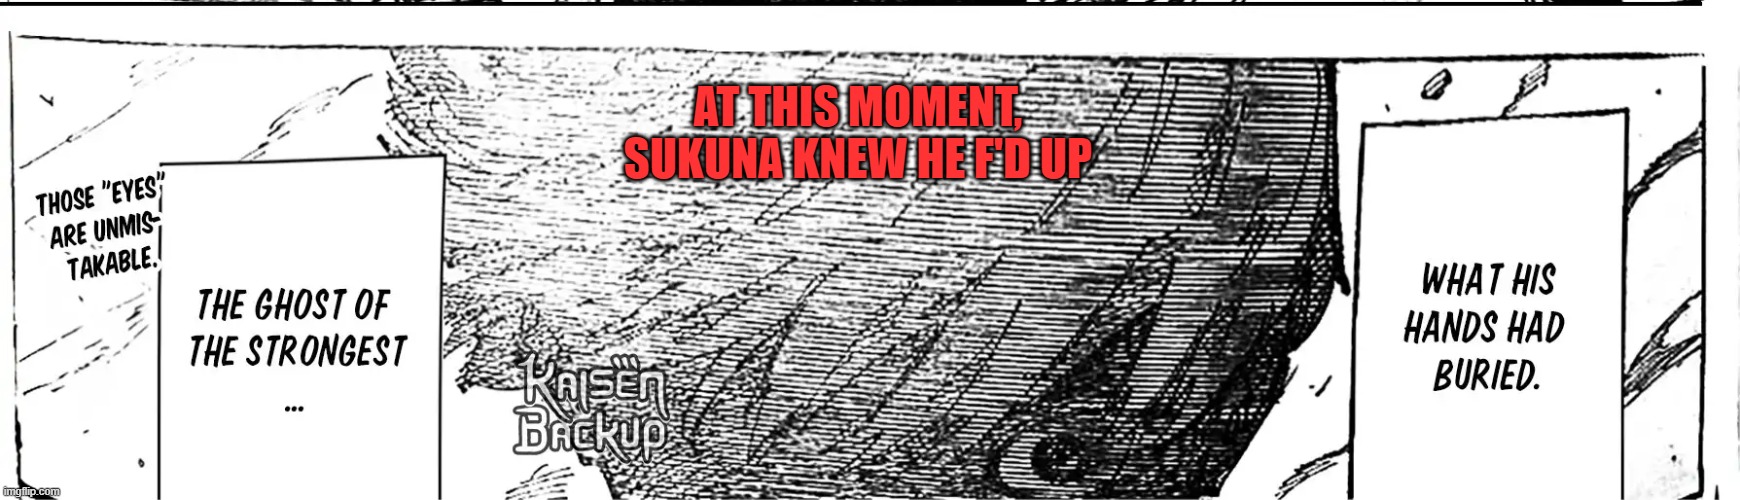 AT THIS MOMENT, SUKUNA KNEW HE F'D UP | image tagged in jujutsu kaisen,gojo,sukuna,f'd,oh no | made w/ Imgflip meme maker